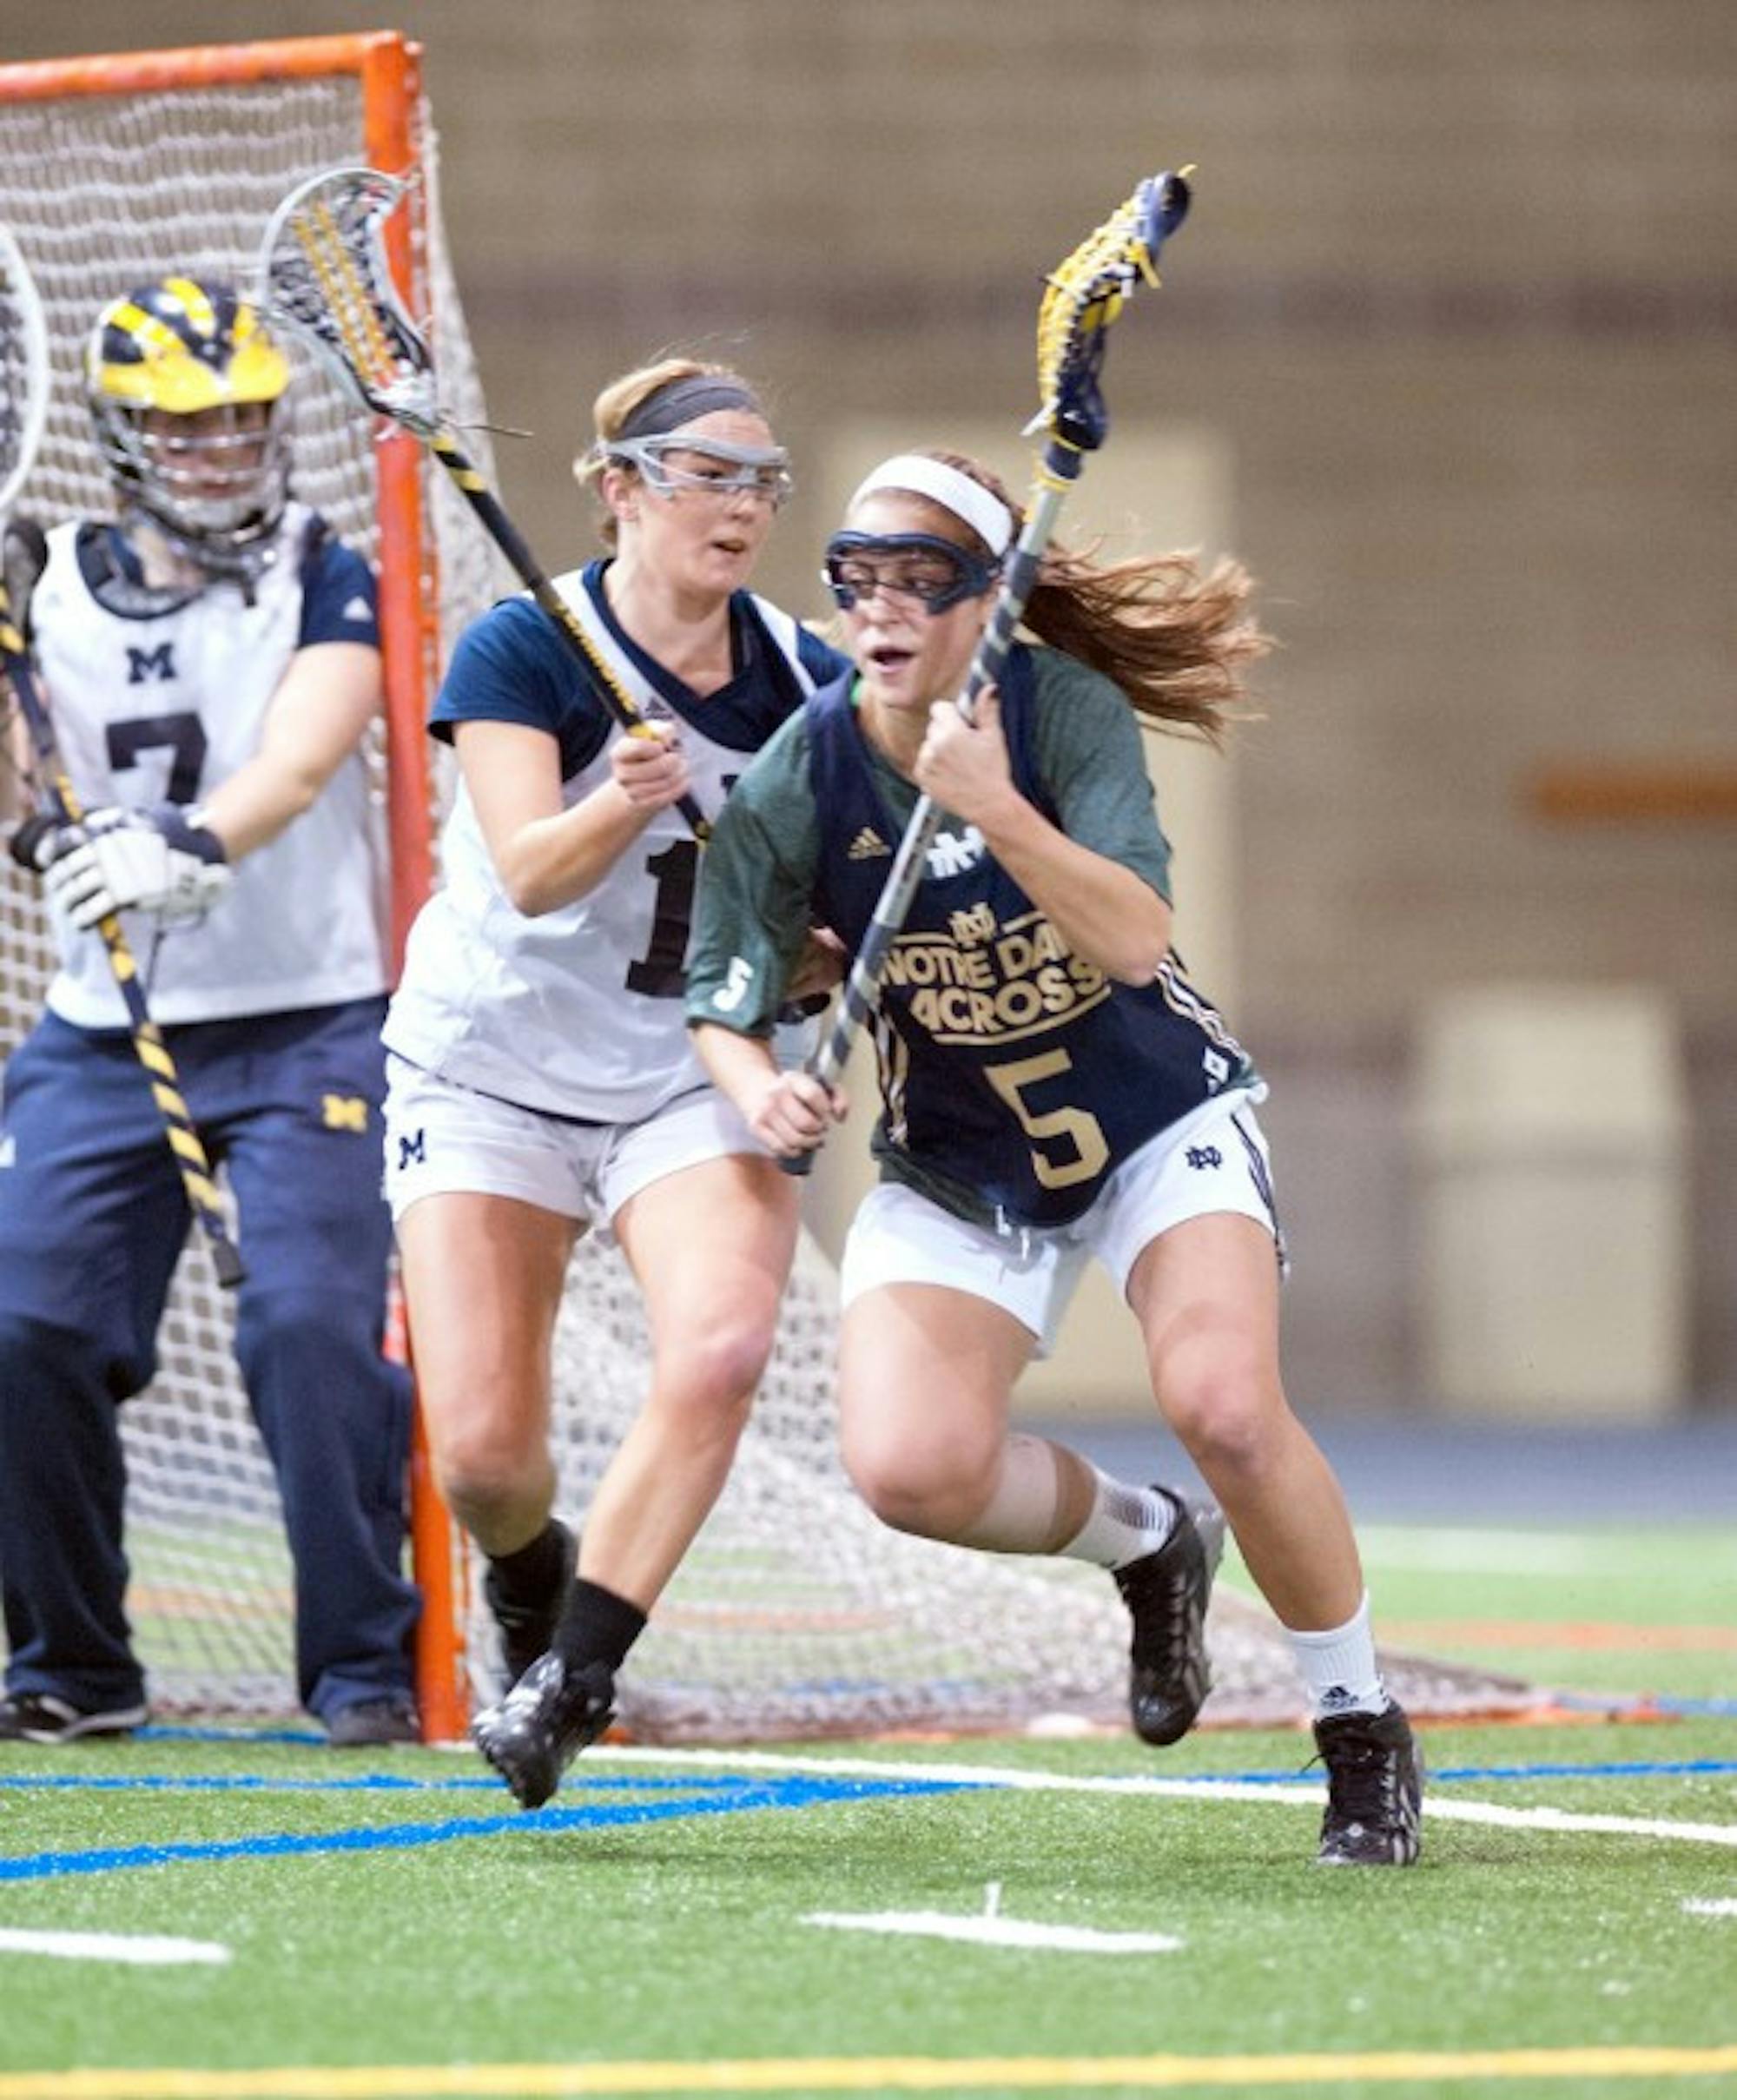 Irish junior attack Rachel Sexton works her way to the front of the net in Notre Dame’s 19-7 exhibition win over Michigan on Feb. 8, 2014.